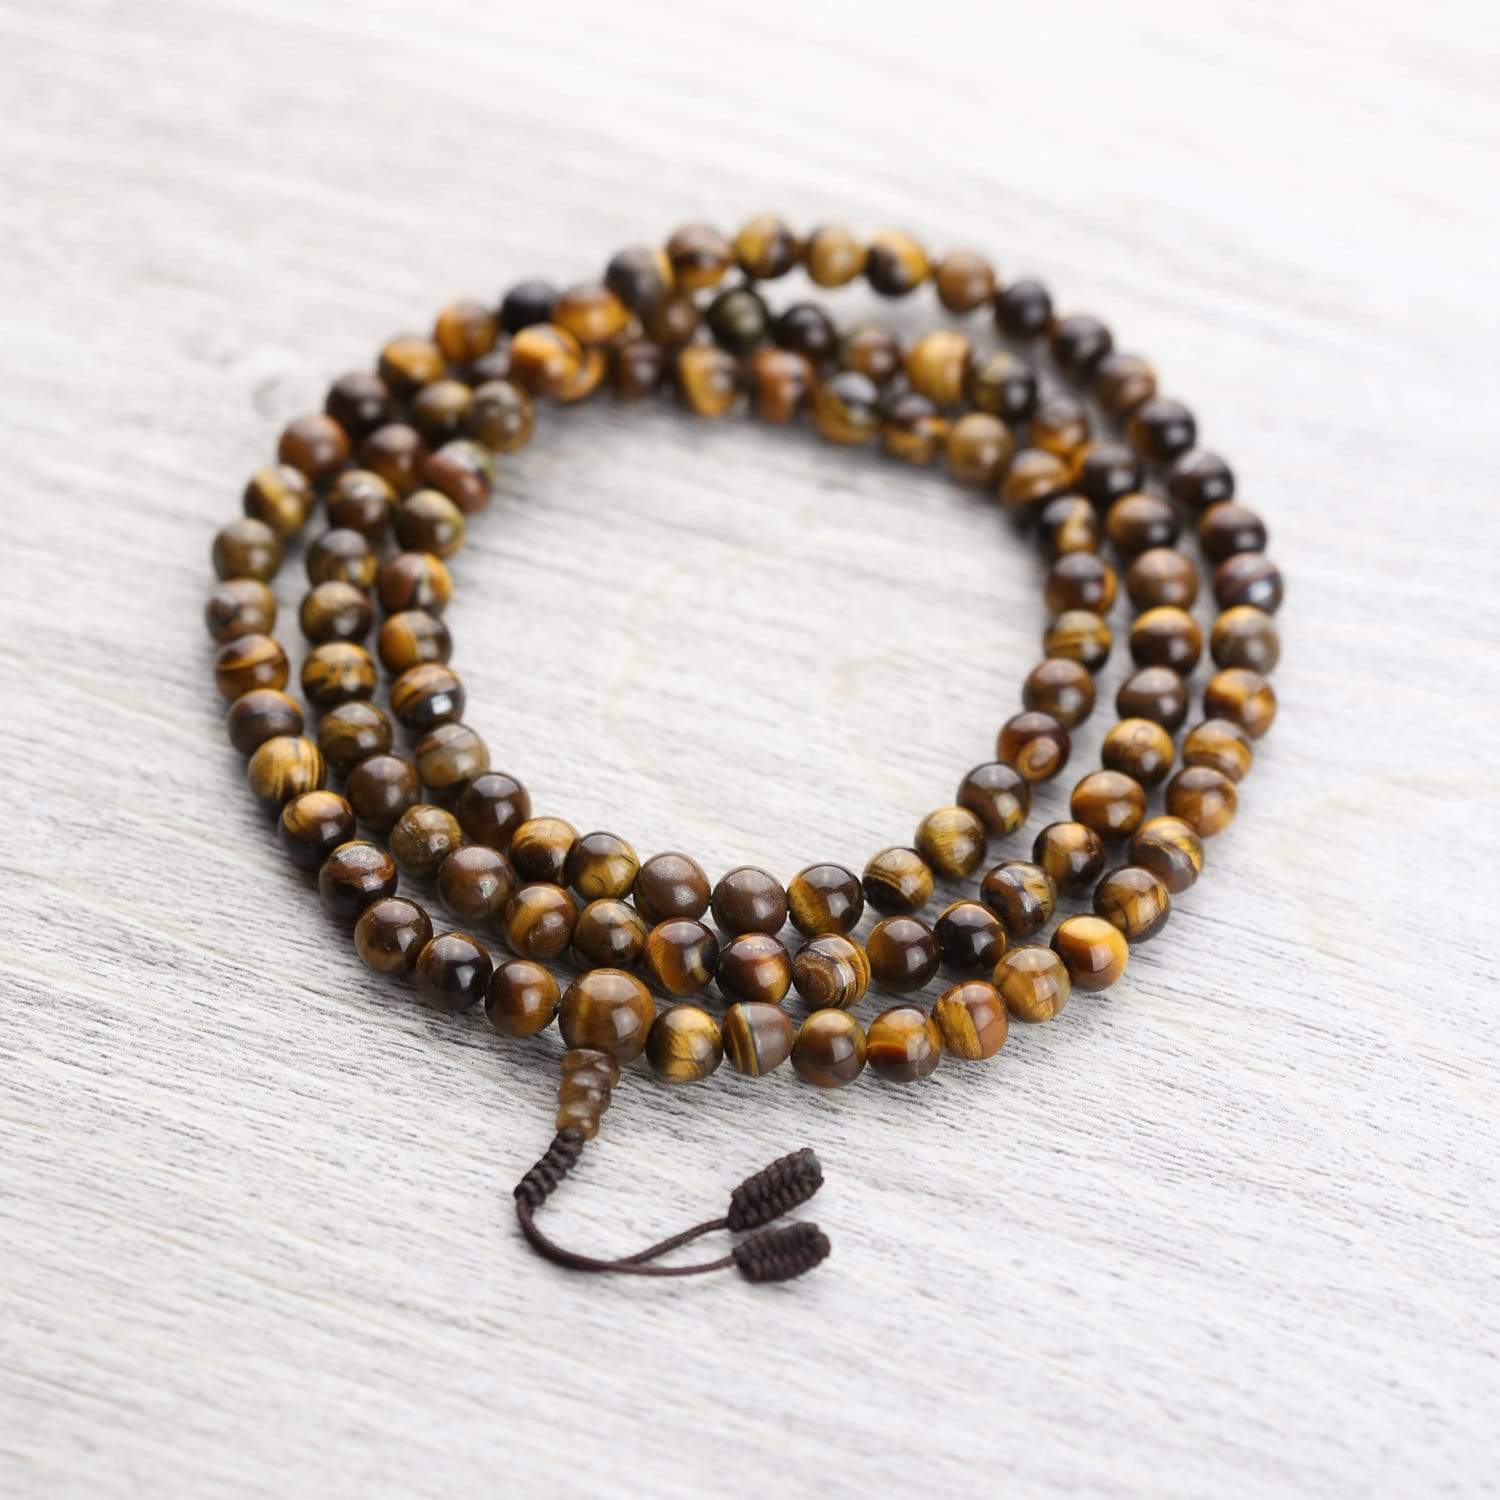 Hand Knotted Tiger Eye108 beads Jap Mala